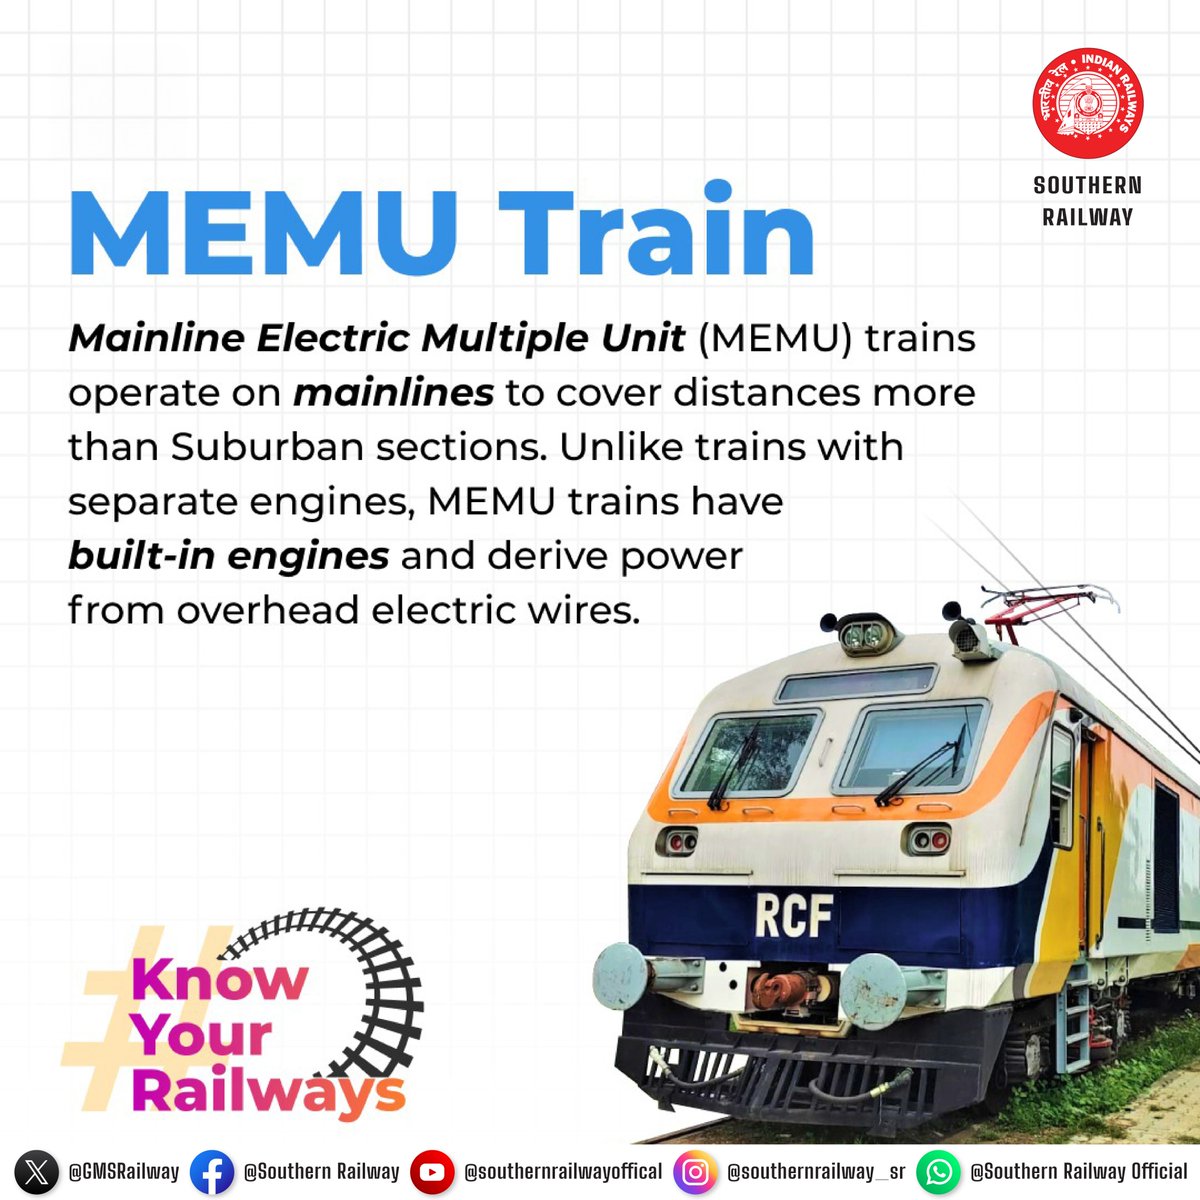 Discover the Power of MEMU Trains! 🚆⚡ Covering Longer Distances with Built-in Engines and Overhead Wires. 

#RailwayInnovation #MEMU #EfficientTravel #SouthernRailway